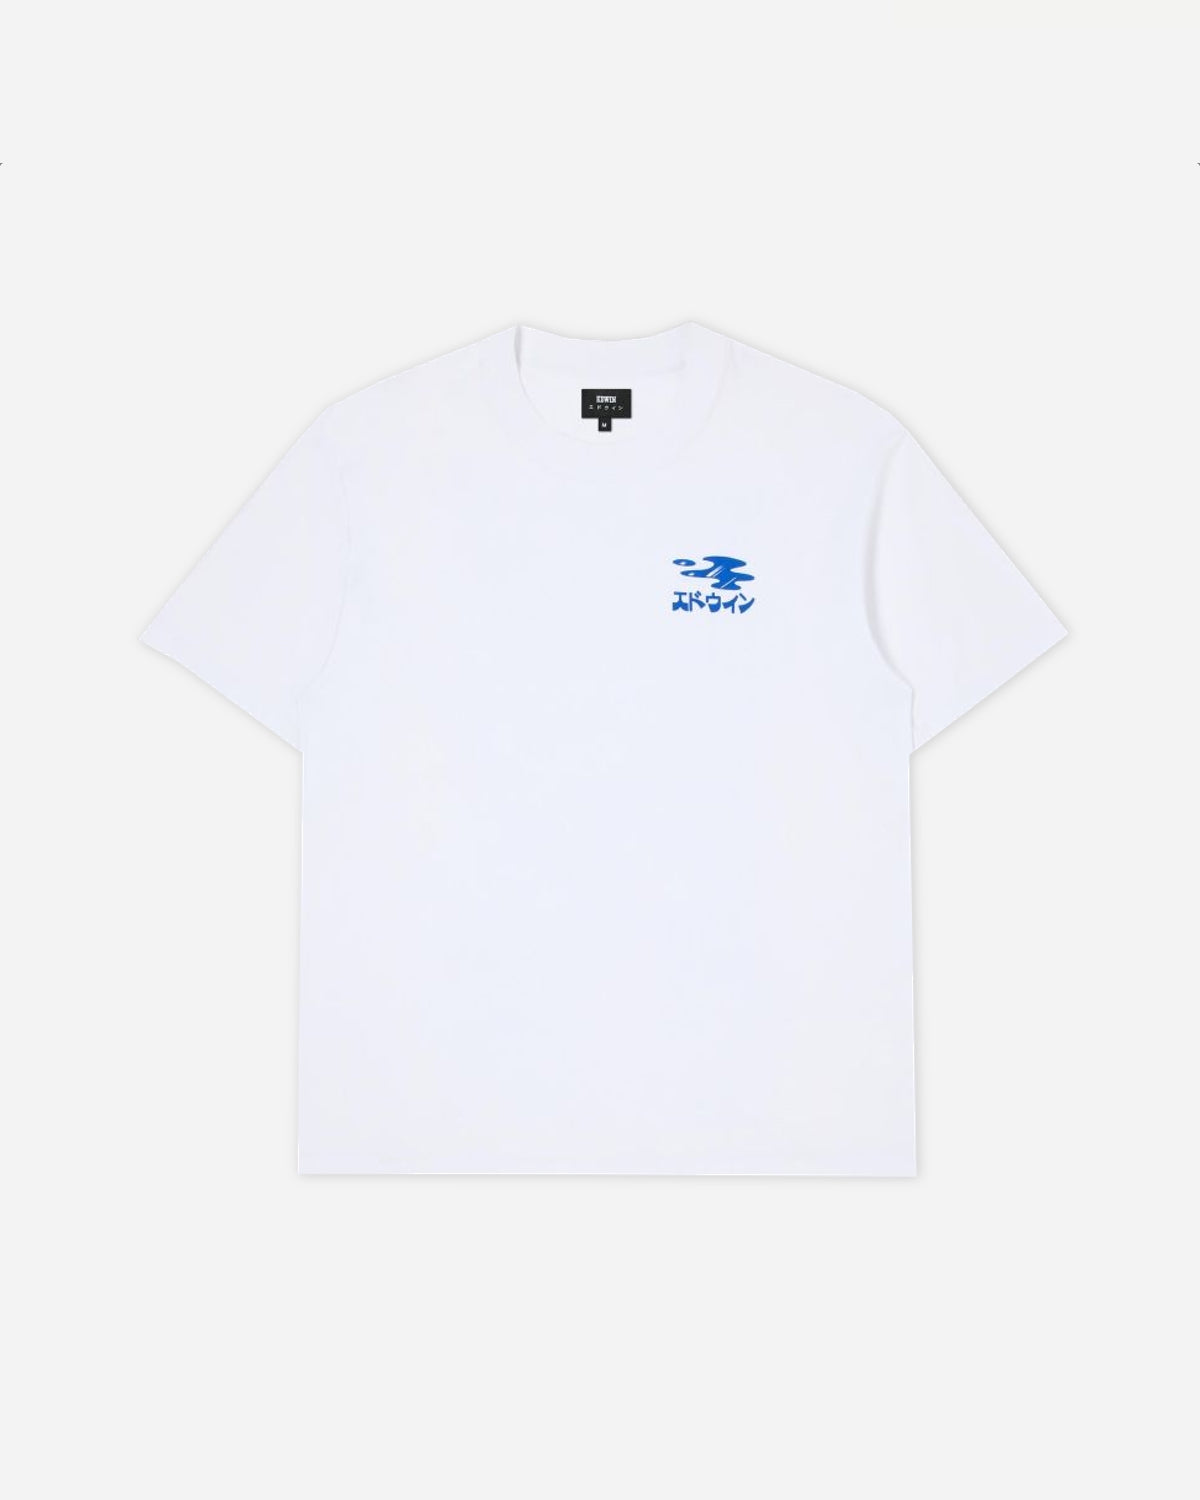 Stay Hydrated T-shirt - White